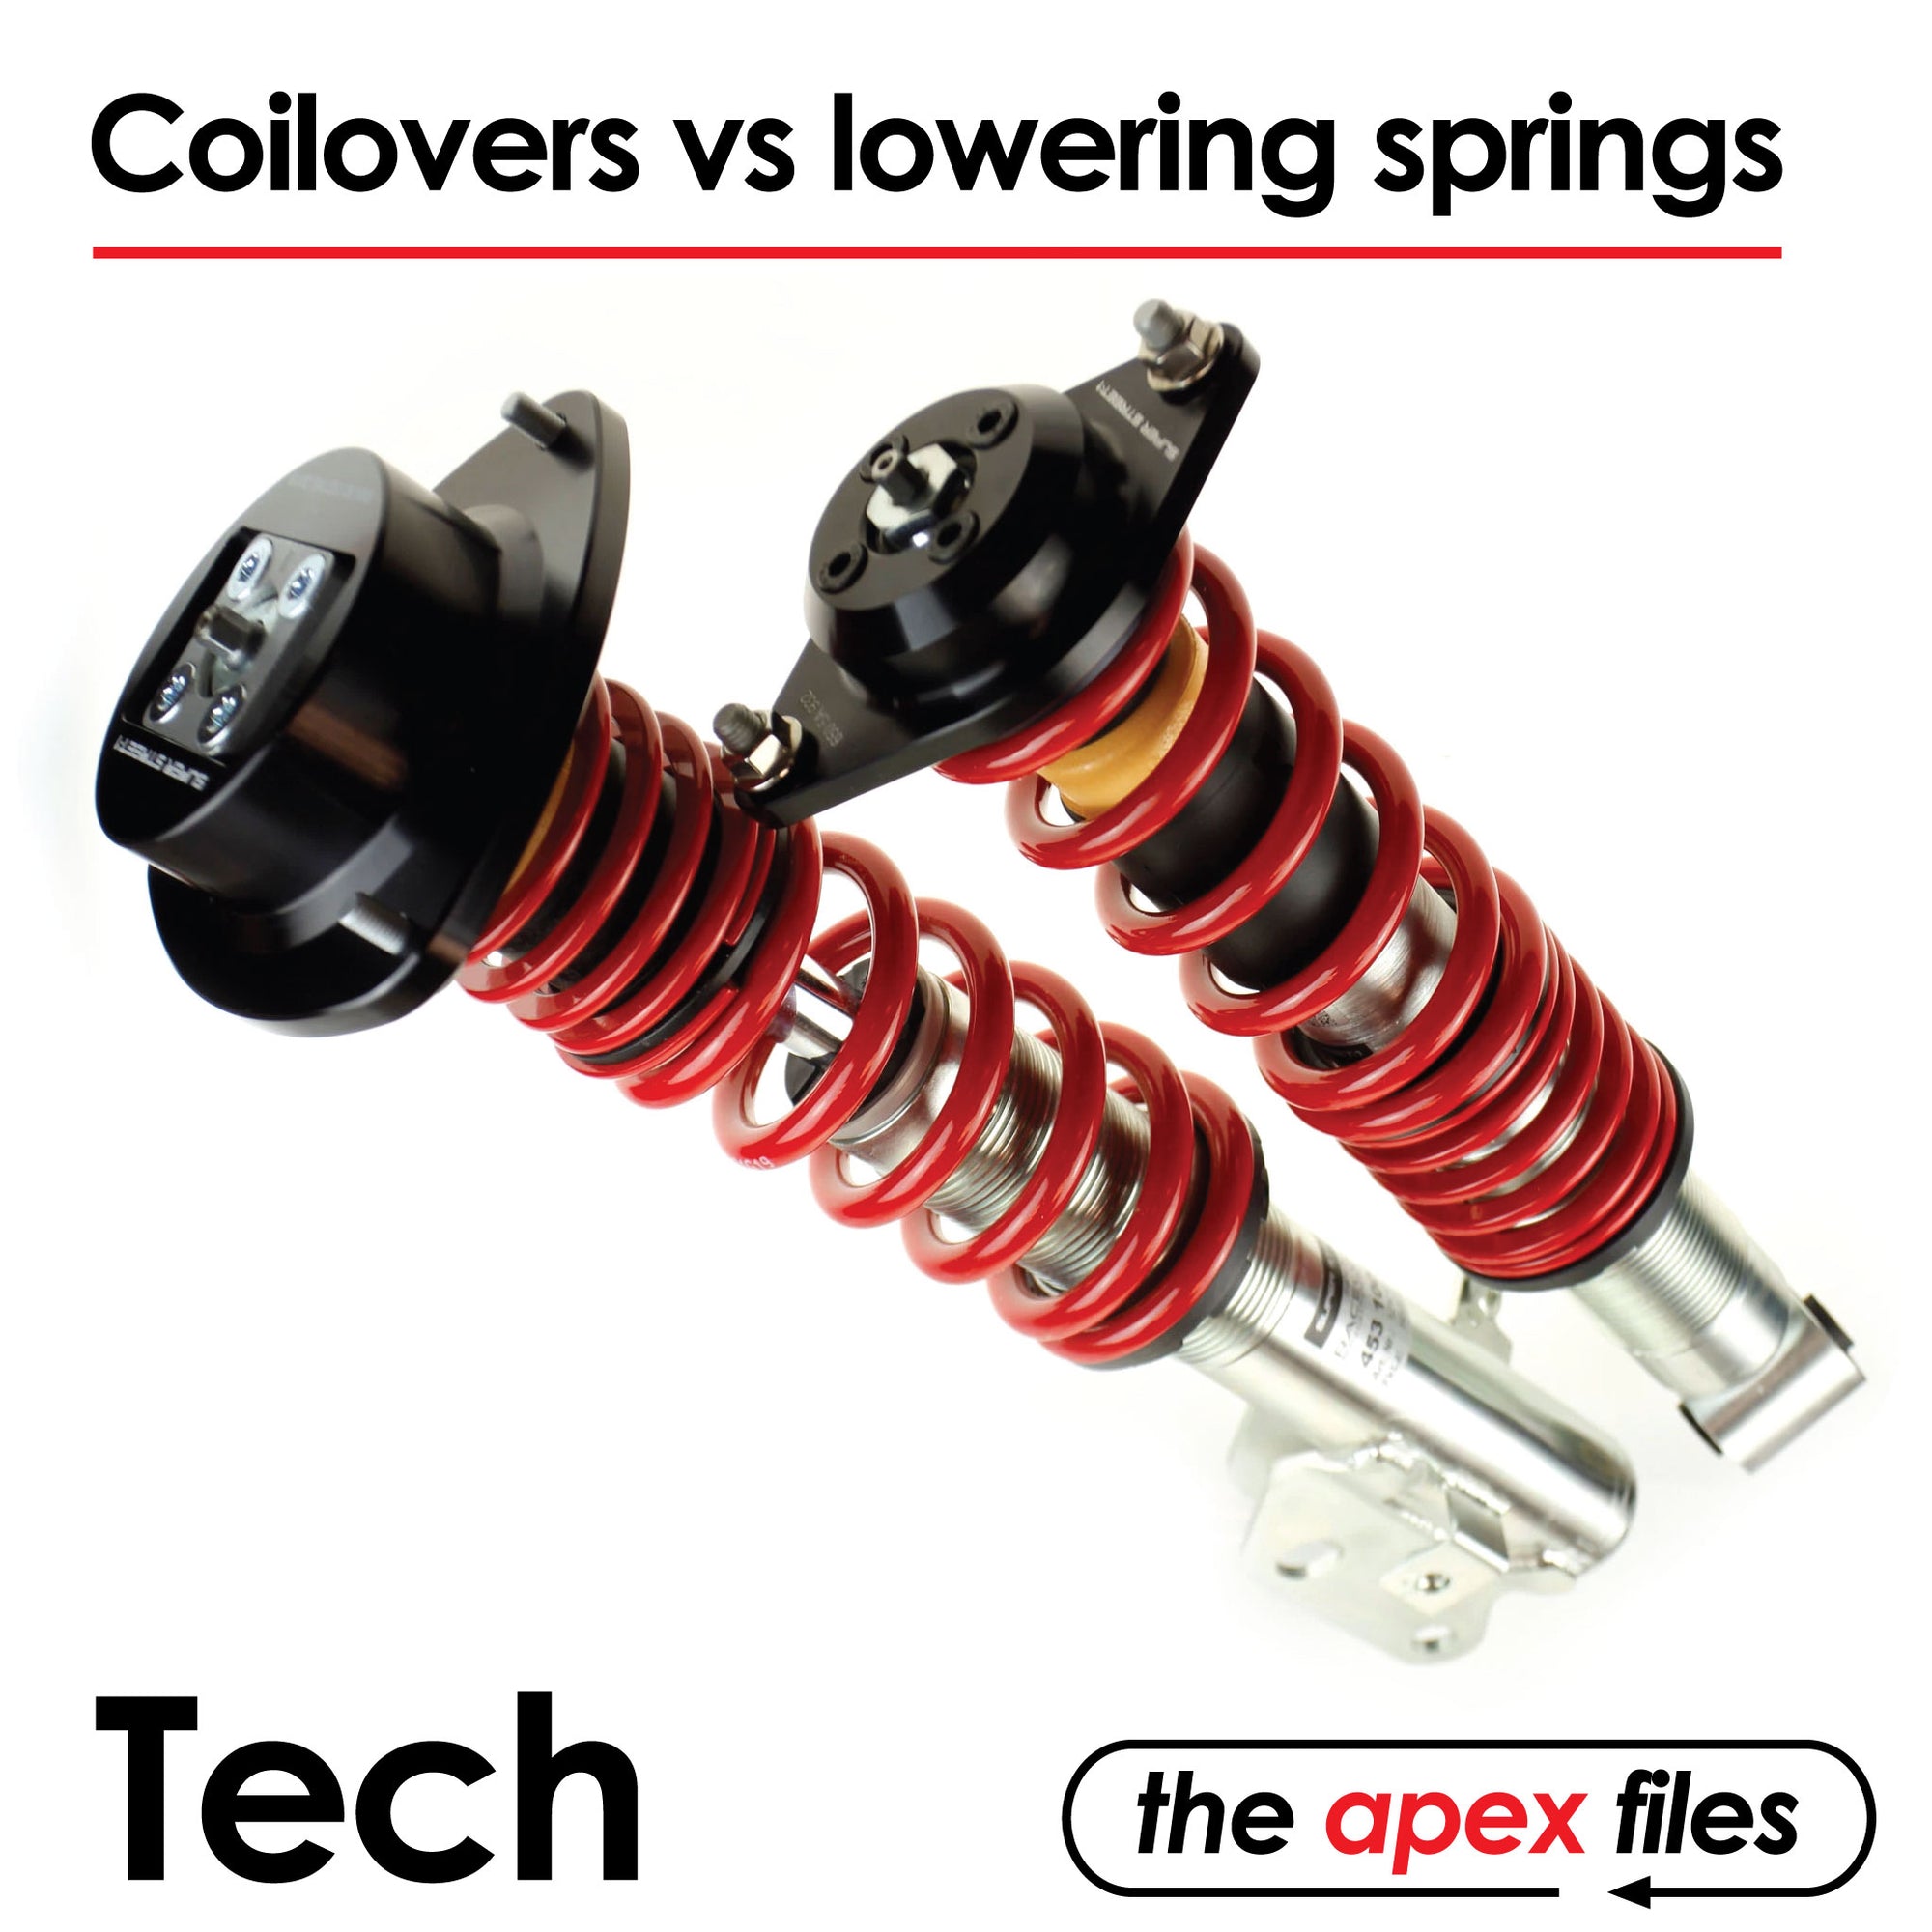 Front and rear coilover body with text "Coilovers vs lowering springs"